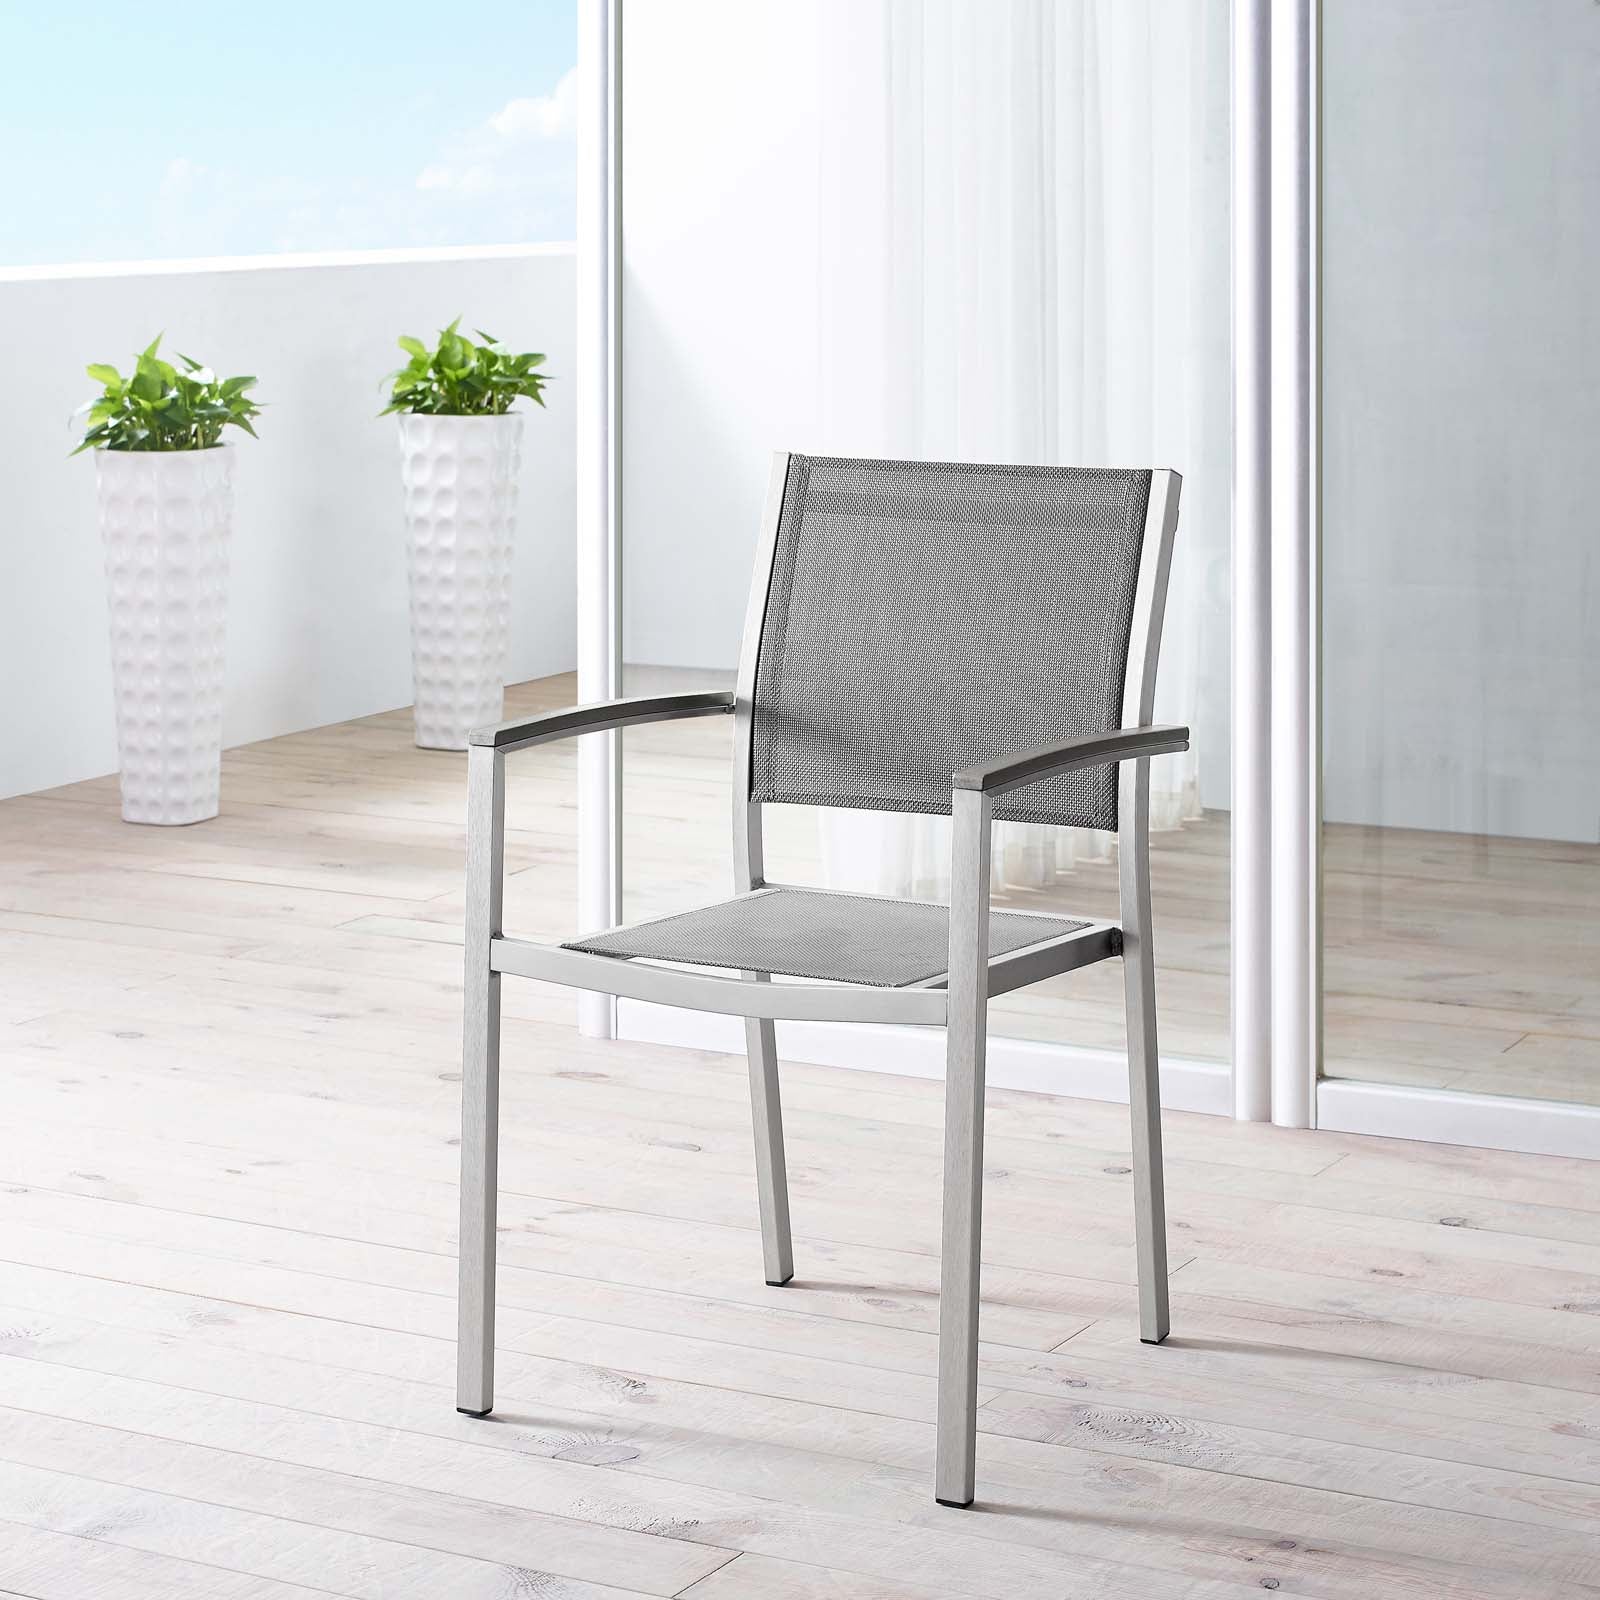 Modway Outdoor Dining Chairs - Shore Outdoor Patio Aluminum Dining Chair Silver Gray